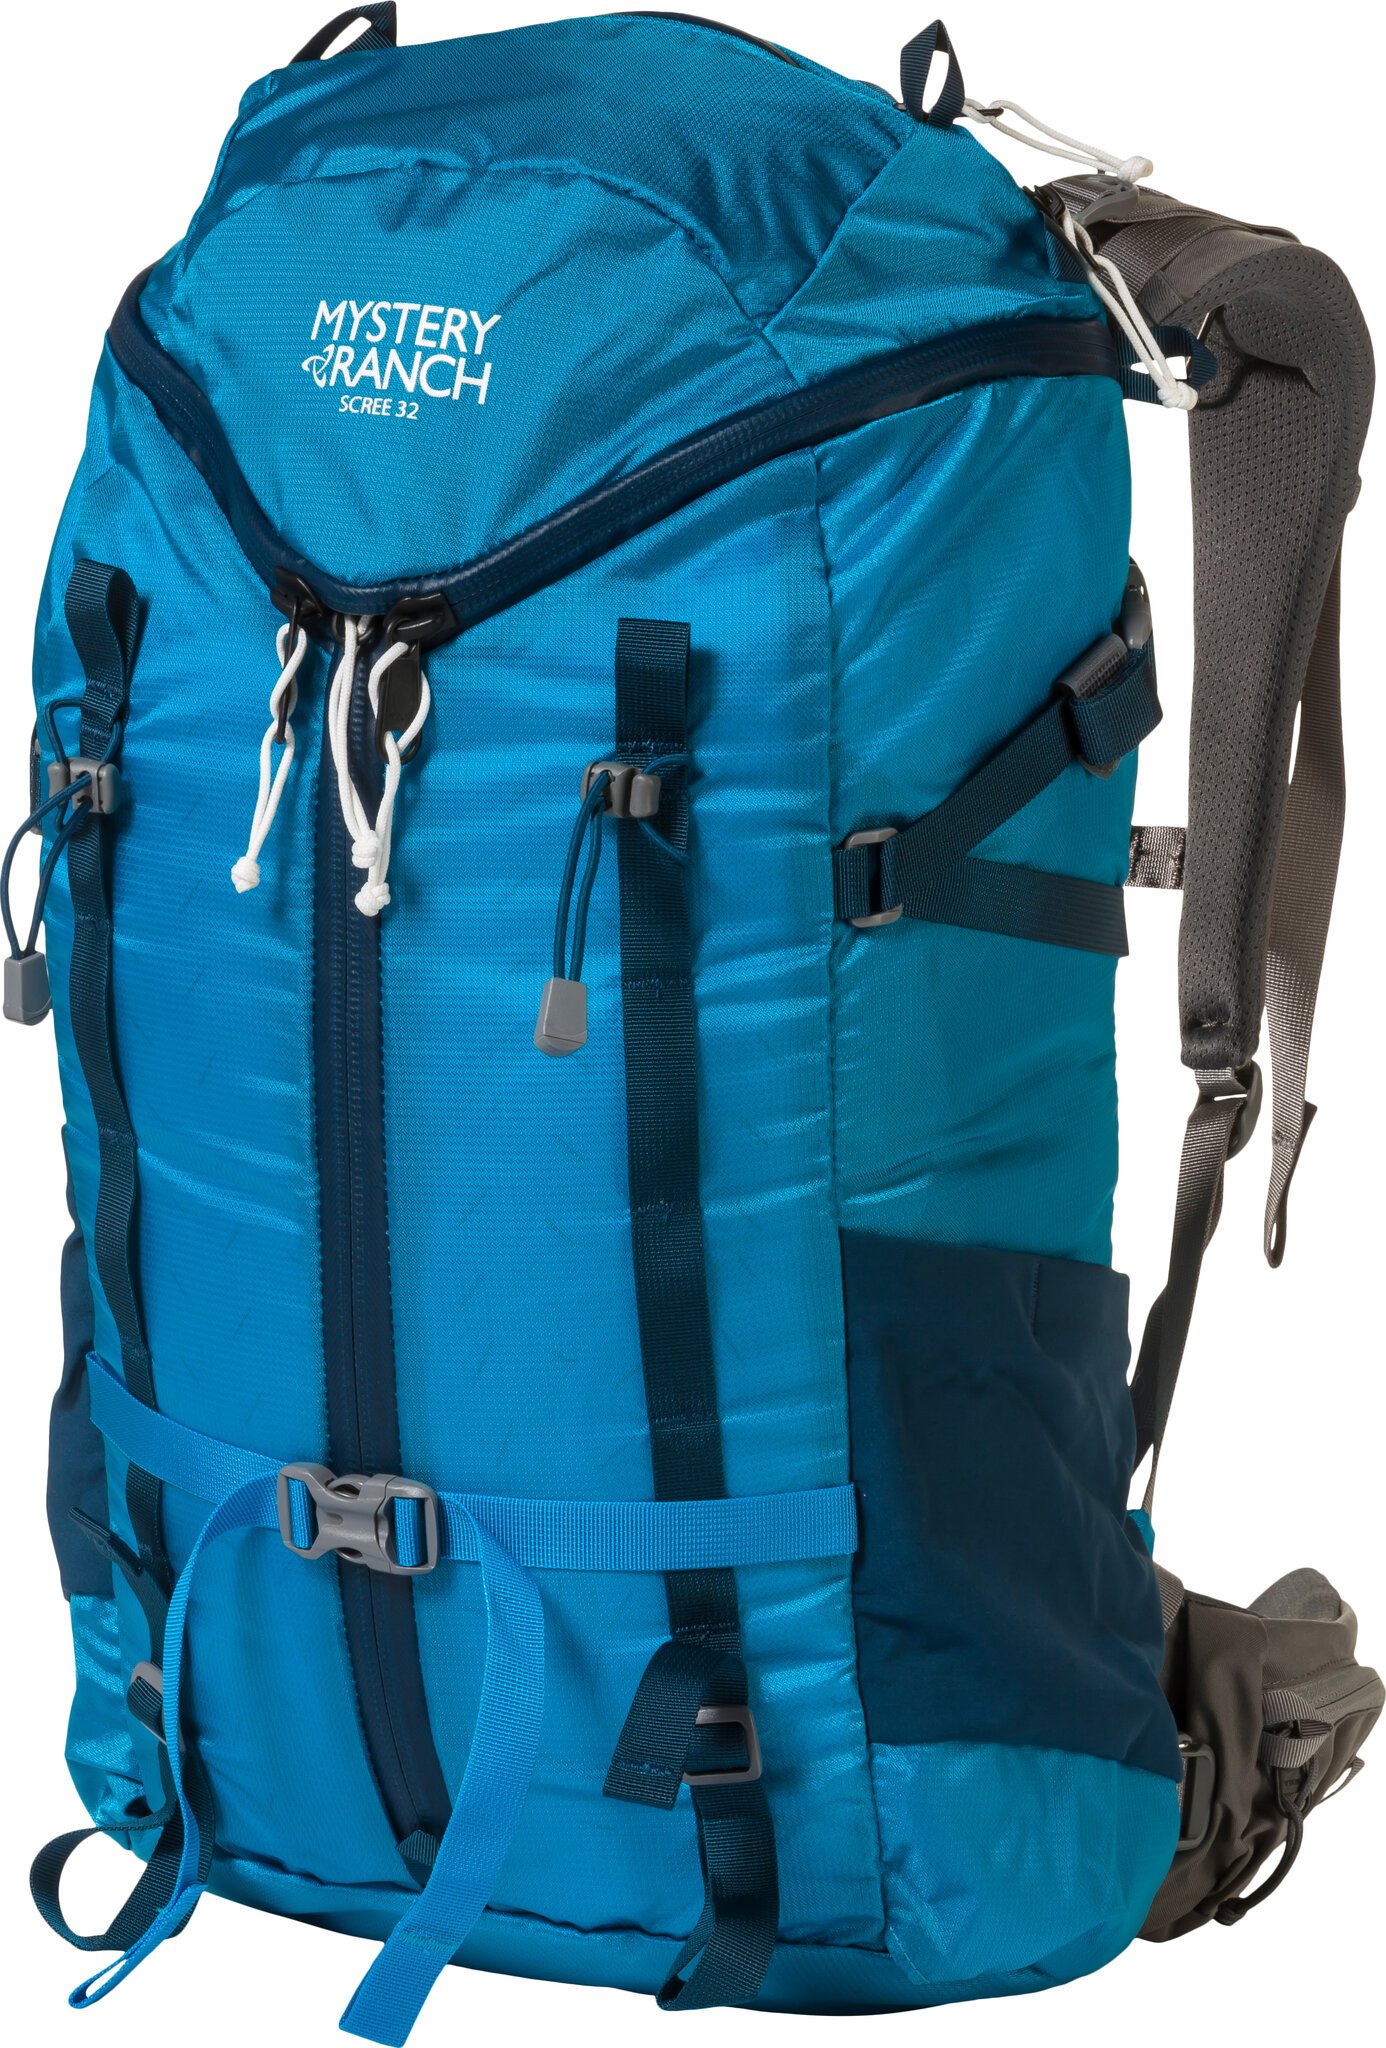 Product image for Scree Backpack 32L - Women's